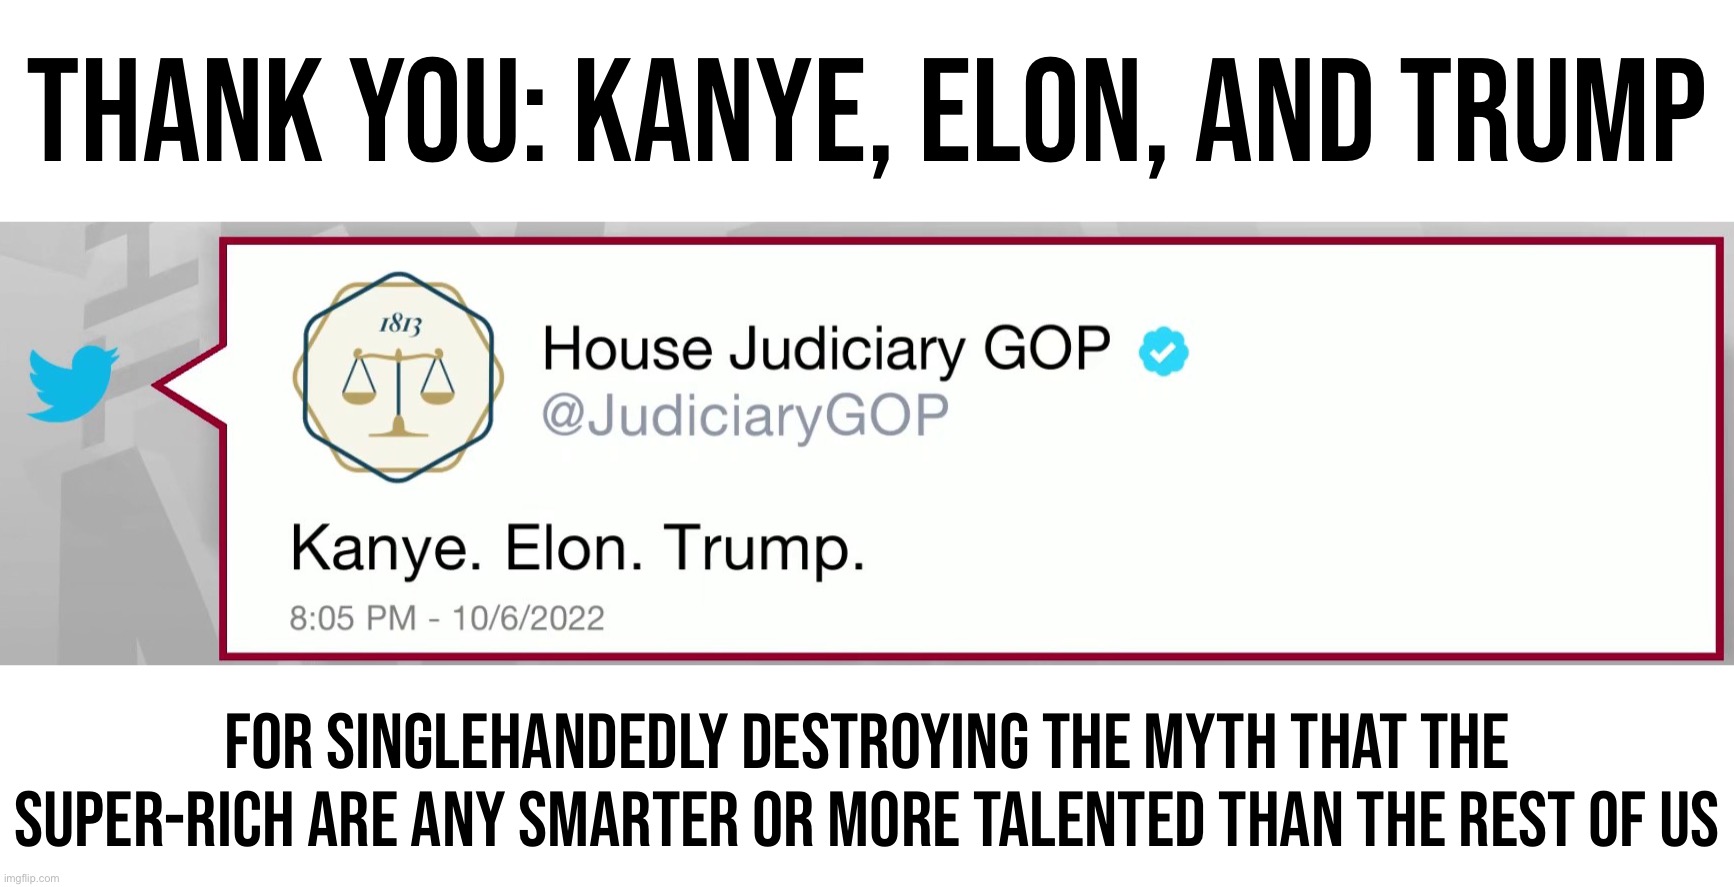 "Kanye Elon Trump" indeed | THANK YOU: KANYE, ELON, AND TRUMP; FOR SINGLEHANDEDLY DESTROYING THE MYTH THAT THE SUPER-RICH ARE ANY SMARTER OR MORE TALENTED THAN THE REST OF US | image tagged in house judiciary gop kanye elon trump,kanye,elon musk,trump,billionaires,assholes | made w/ Imgflip meme maker